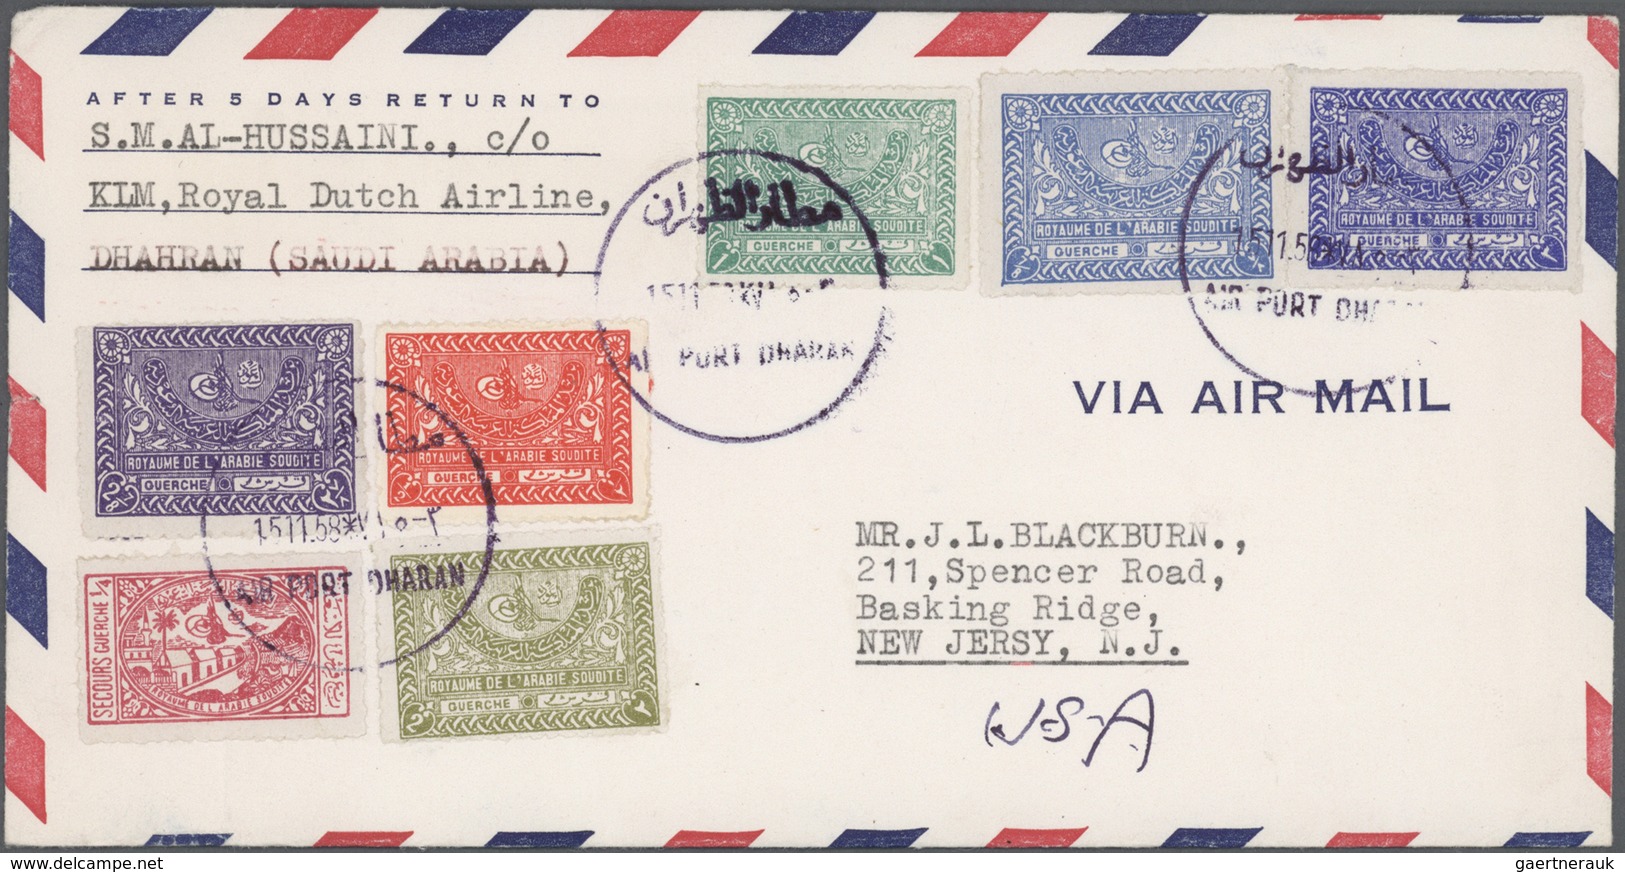 23979 Saudi-Arabien: 1947-75, 36 Covers including registered mail and air mails, attractive frankings.